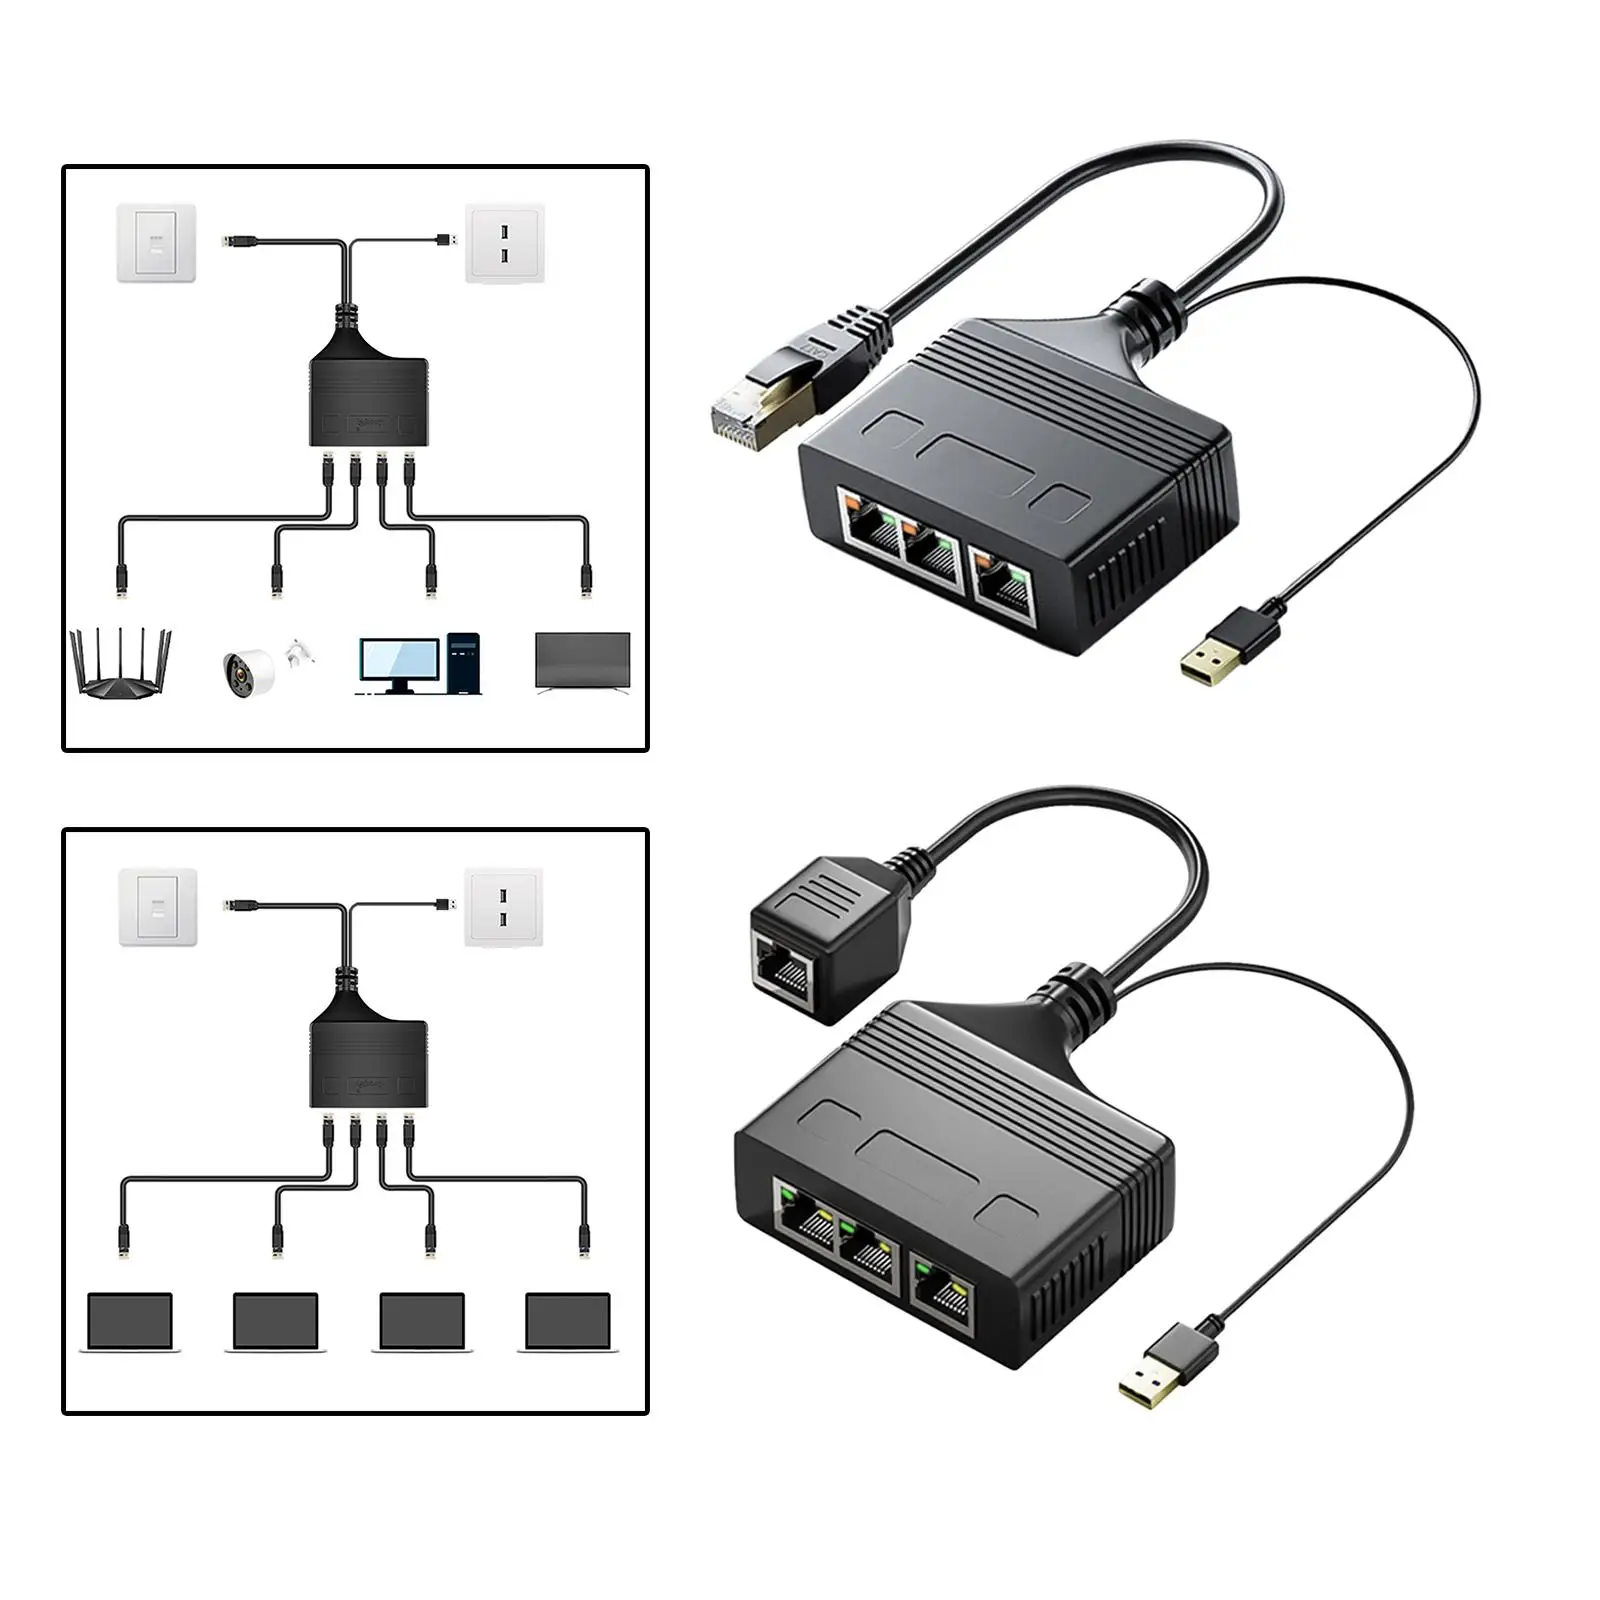 RJ45 Ethernet Splitter Extension Cable 1 to 3 Ways High Speed RJ 45 Connector Network Adapter for Cat5/5e/6/7/8 Cable